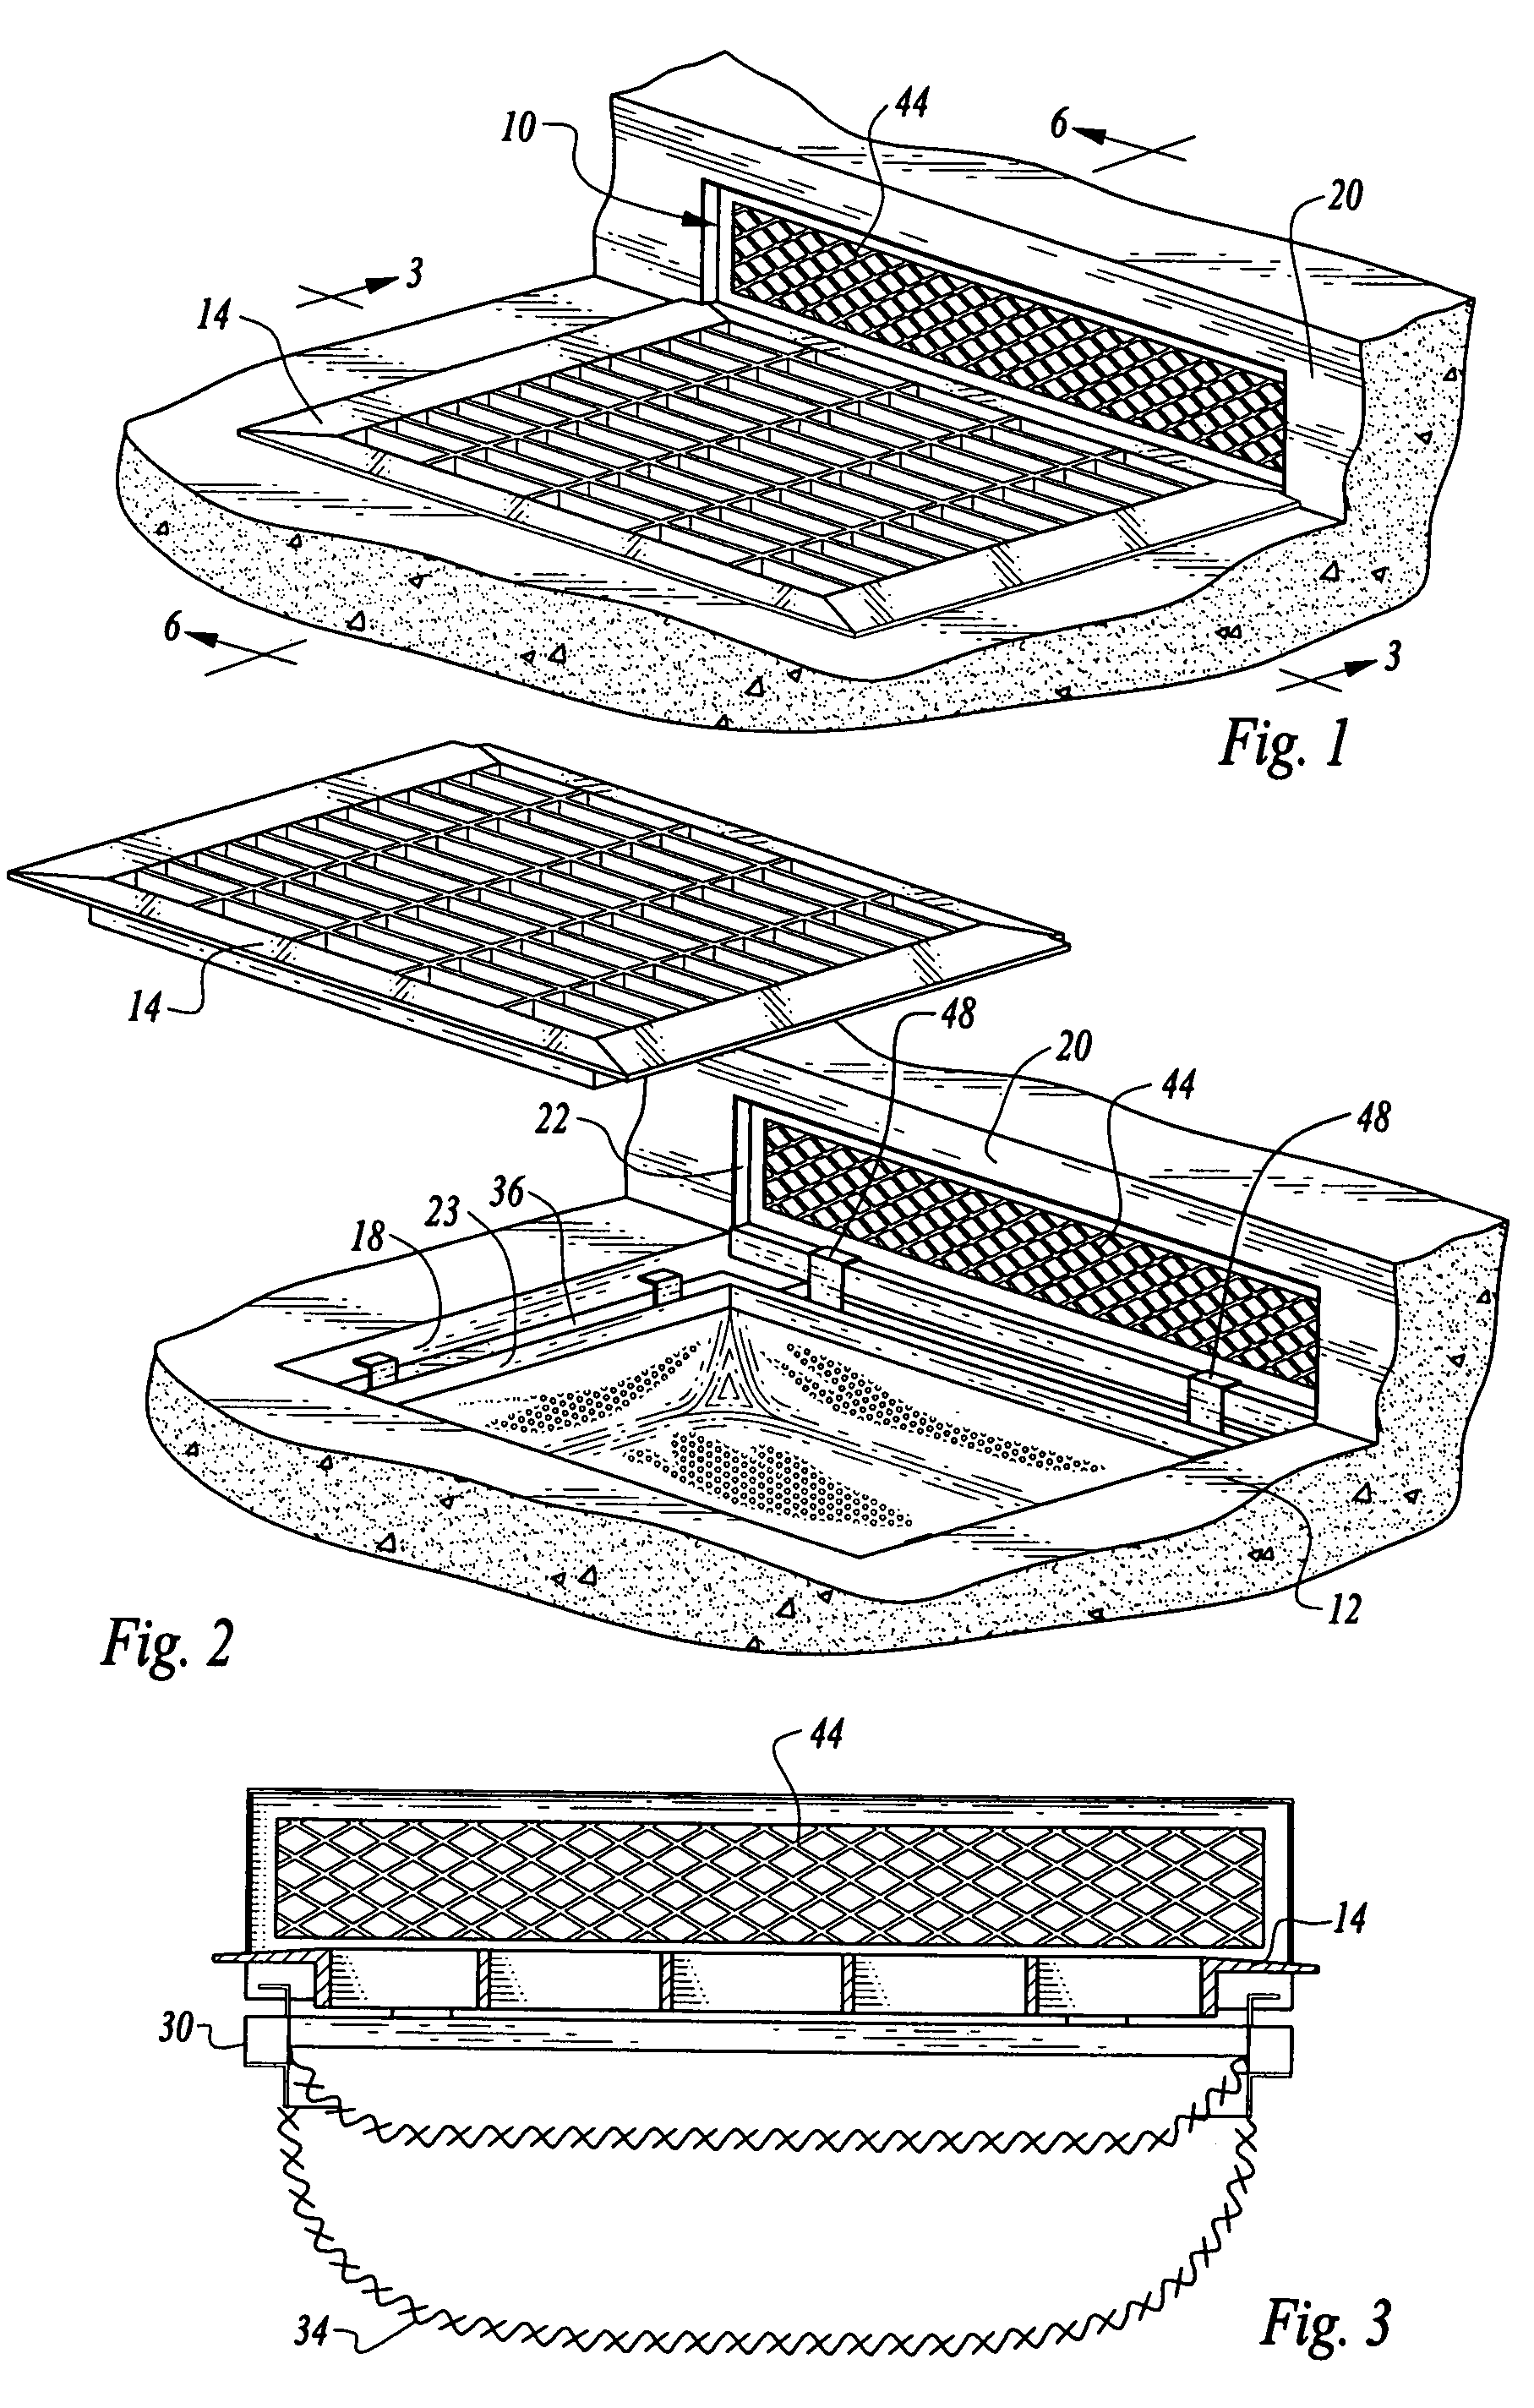 Apparatus for filtering out and collecting debris at a storm drain